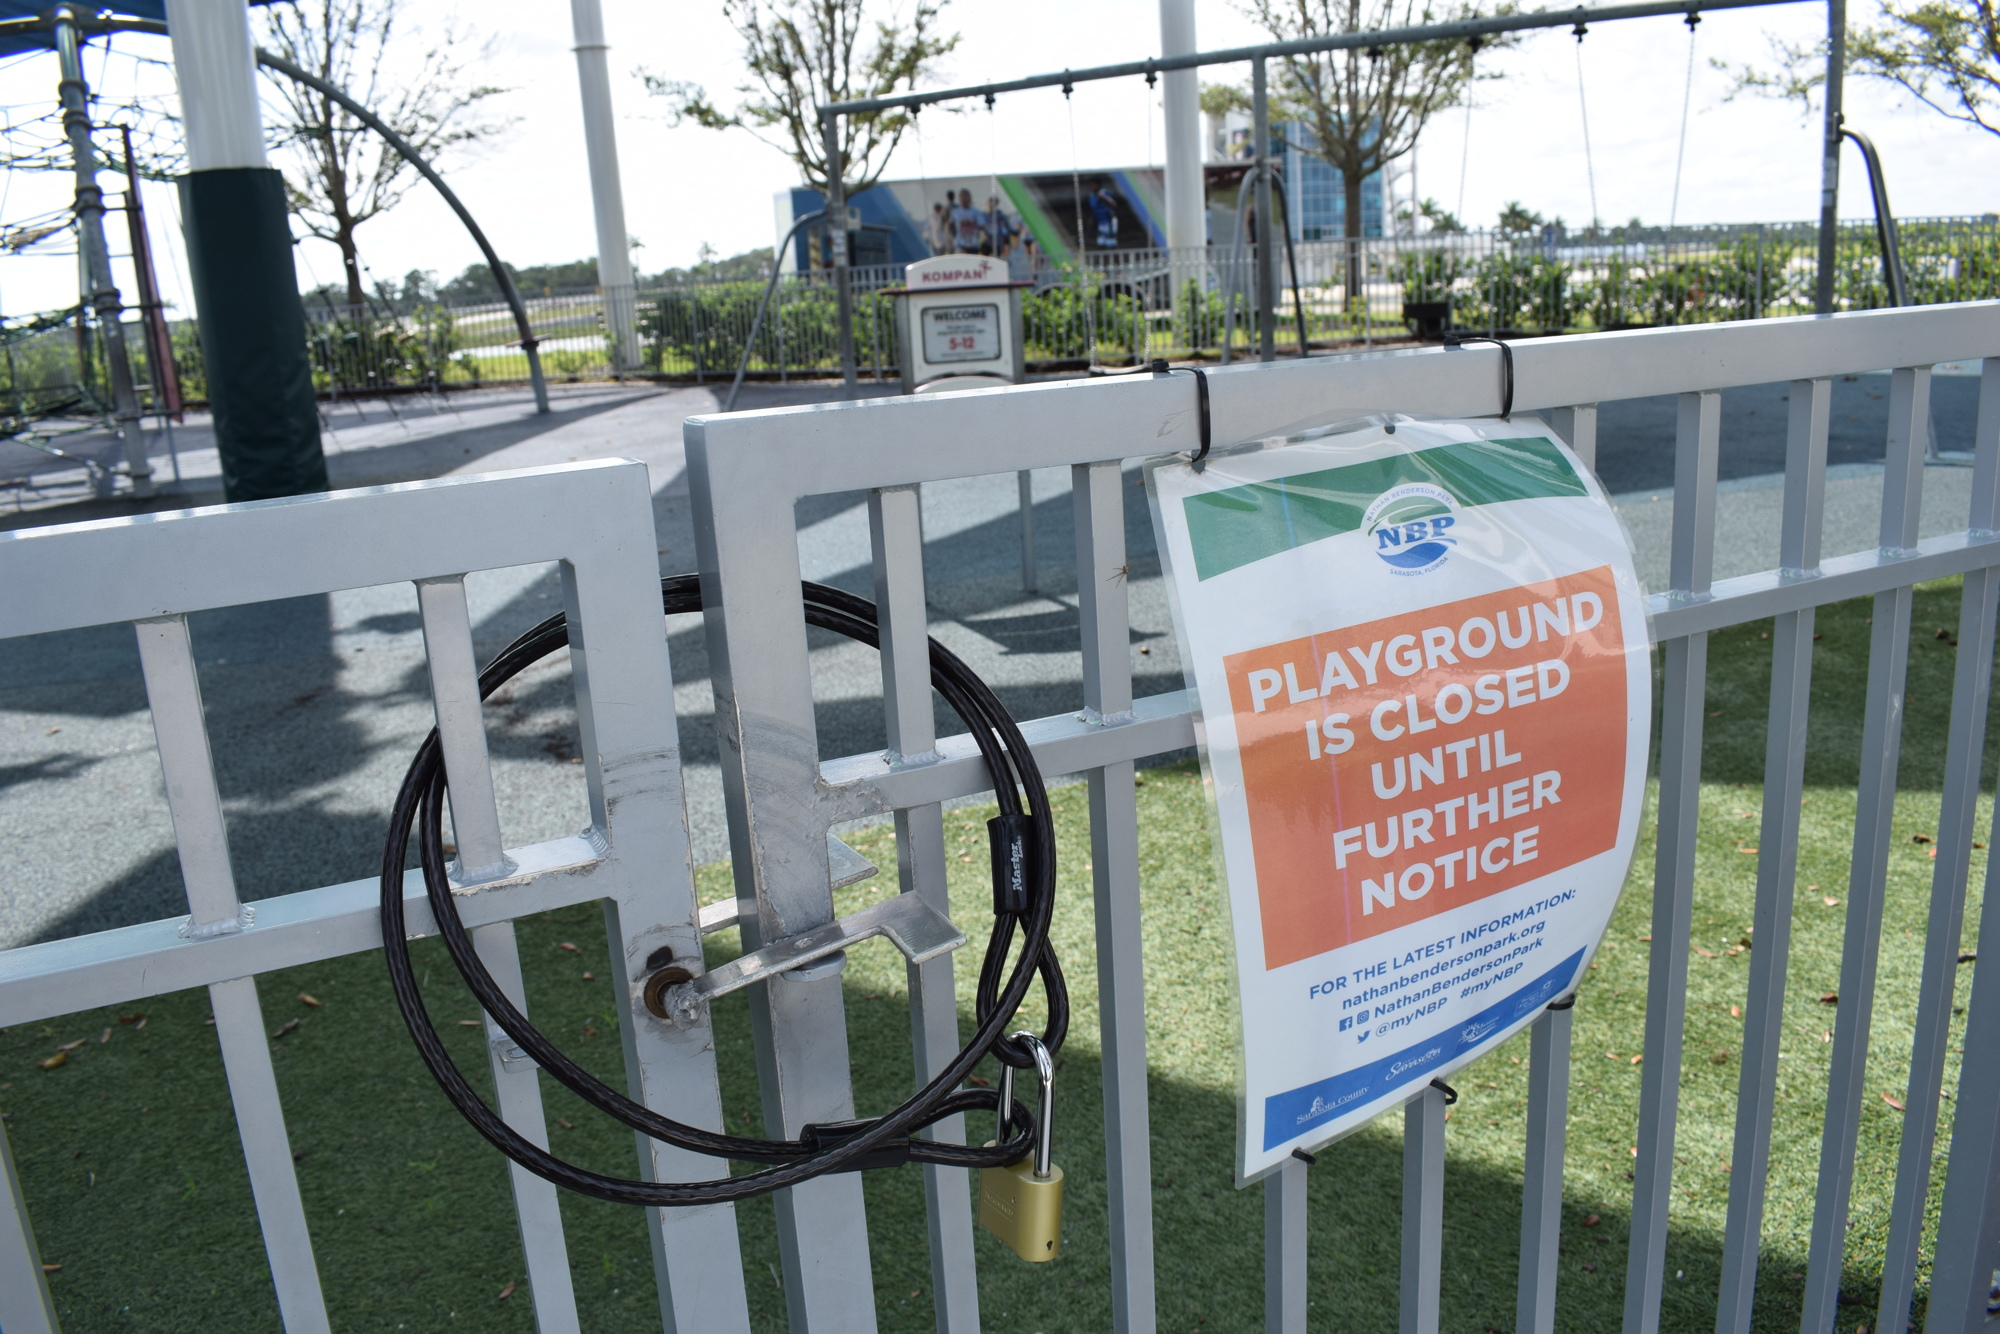 The playground at Nathan Benderson Park was still closed on June 1.